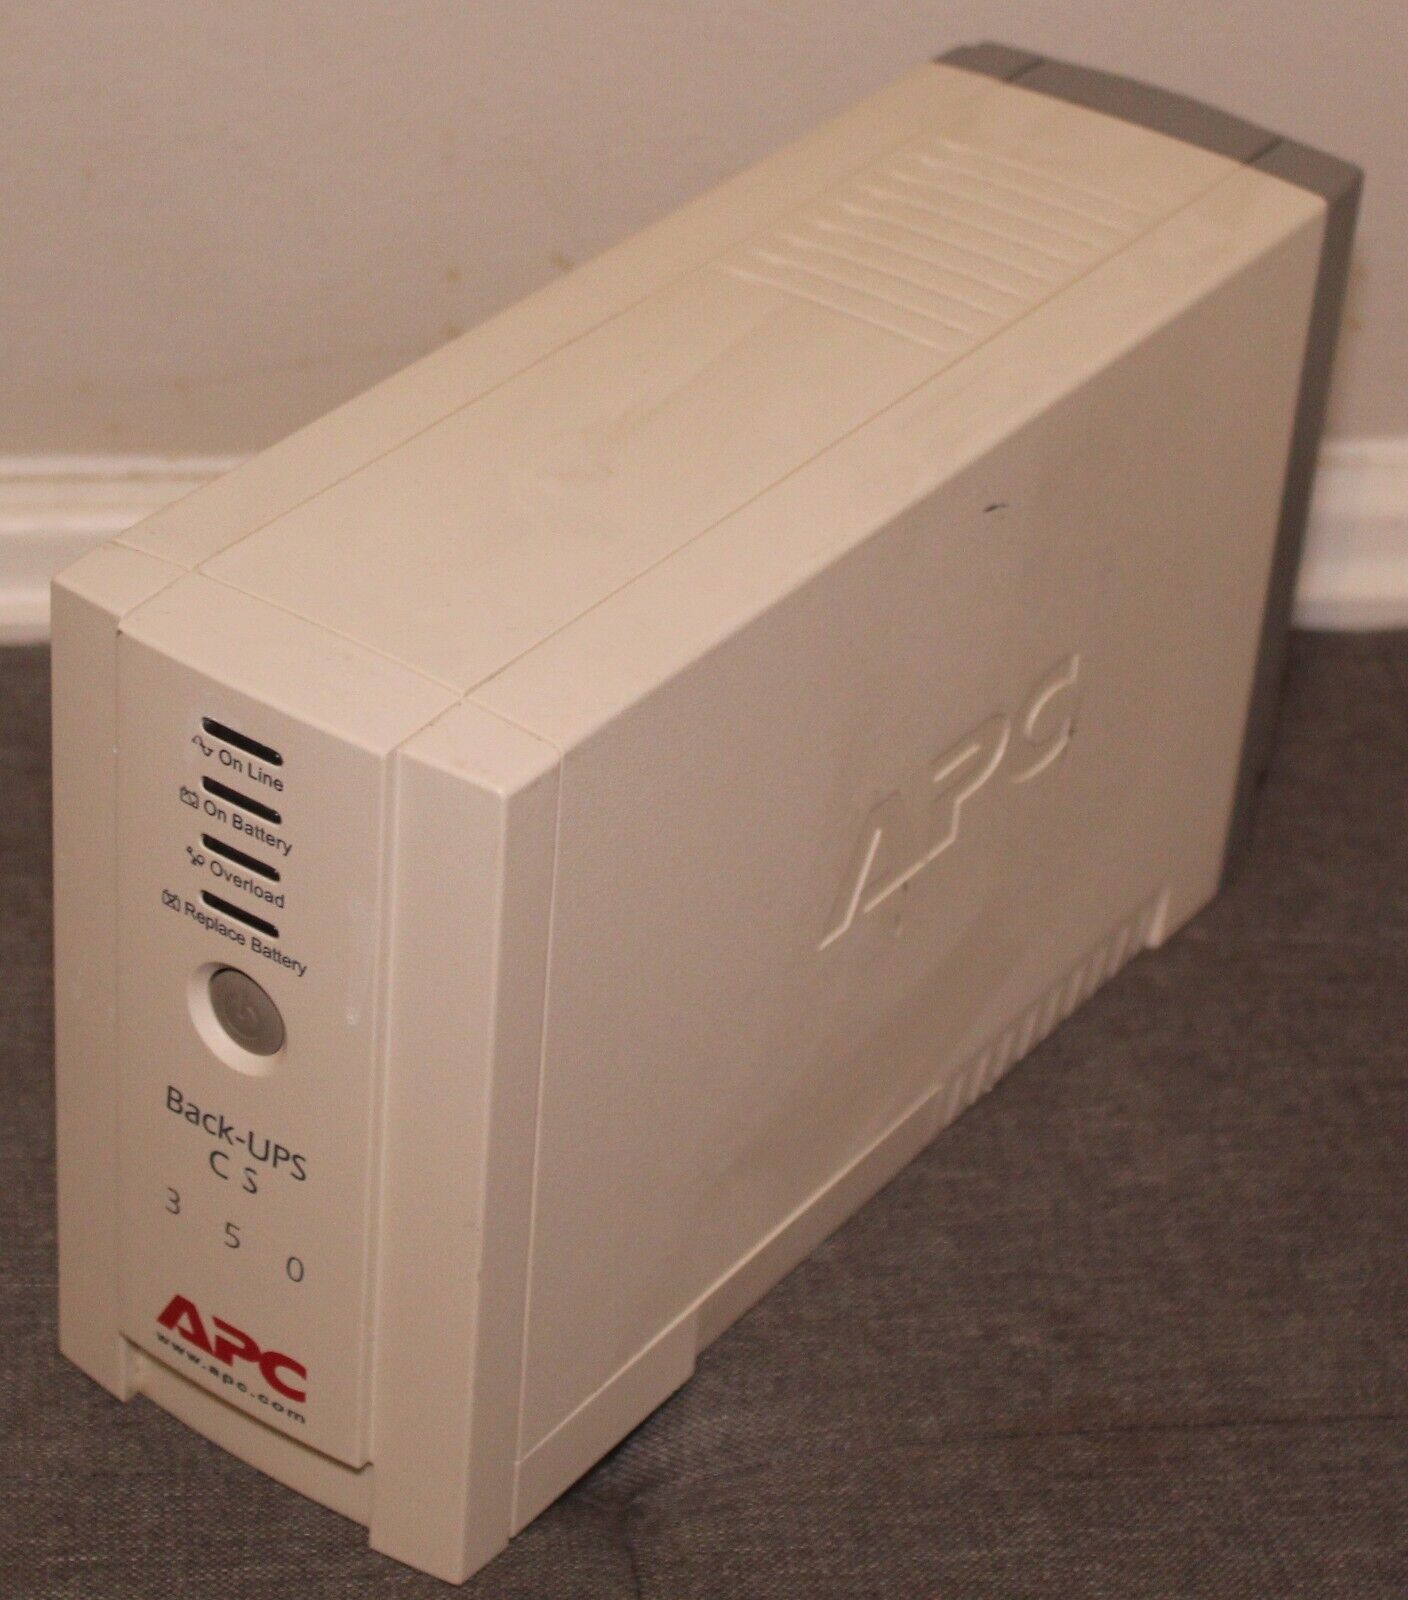 APC UPS 350 UPS For Home or Office Use - Needs Battery